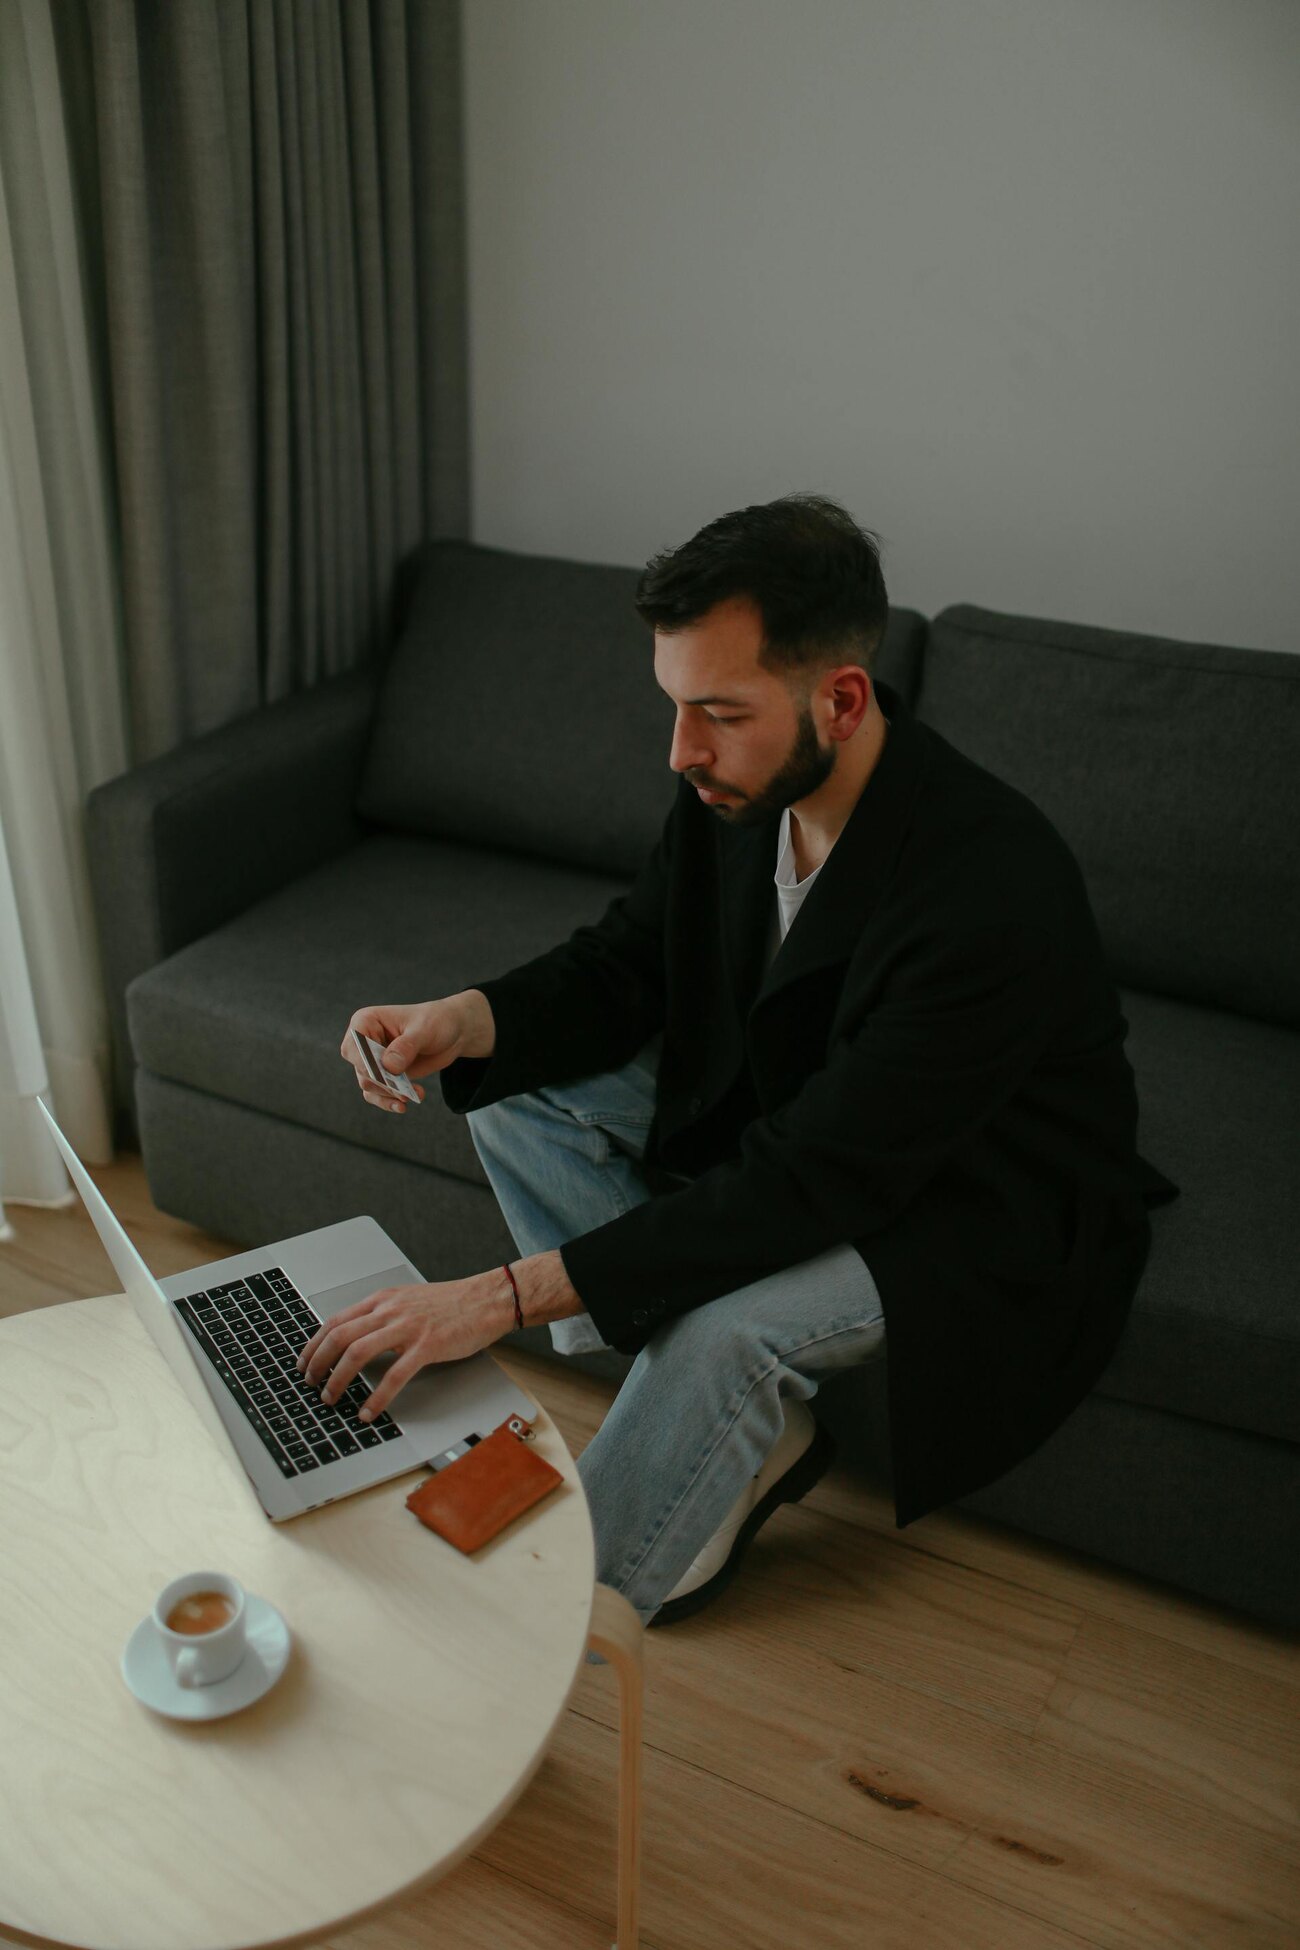 A man sitting on a couch holding a credit card, focused on using a laptop